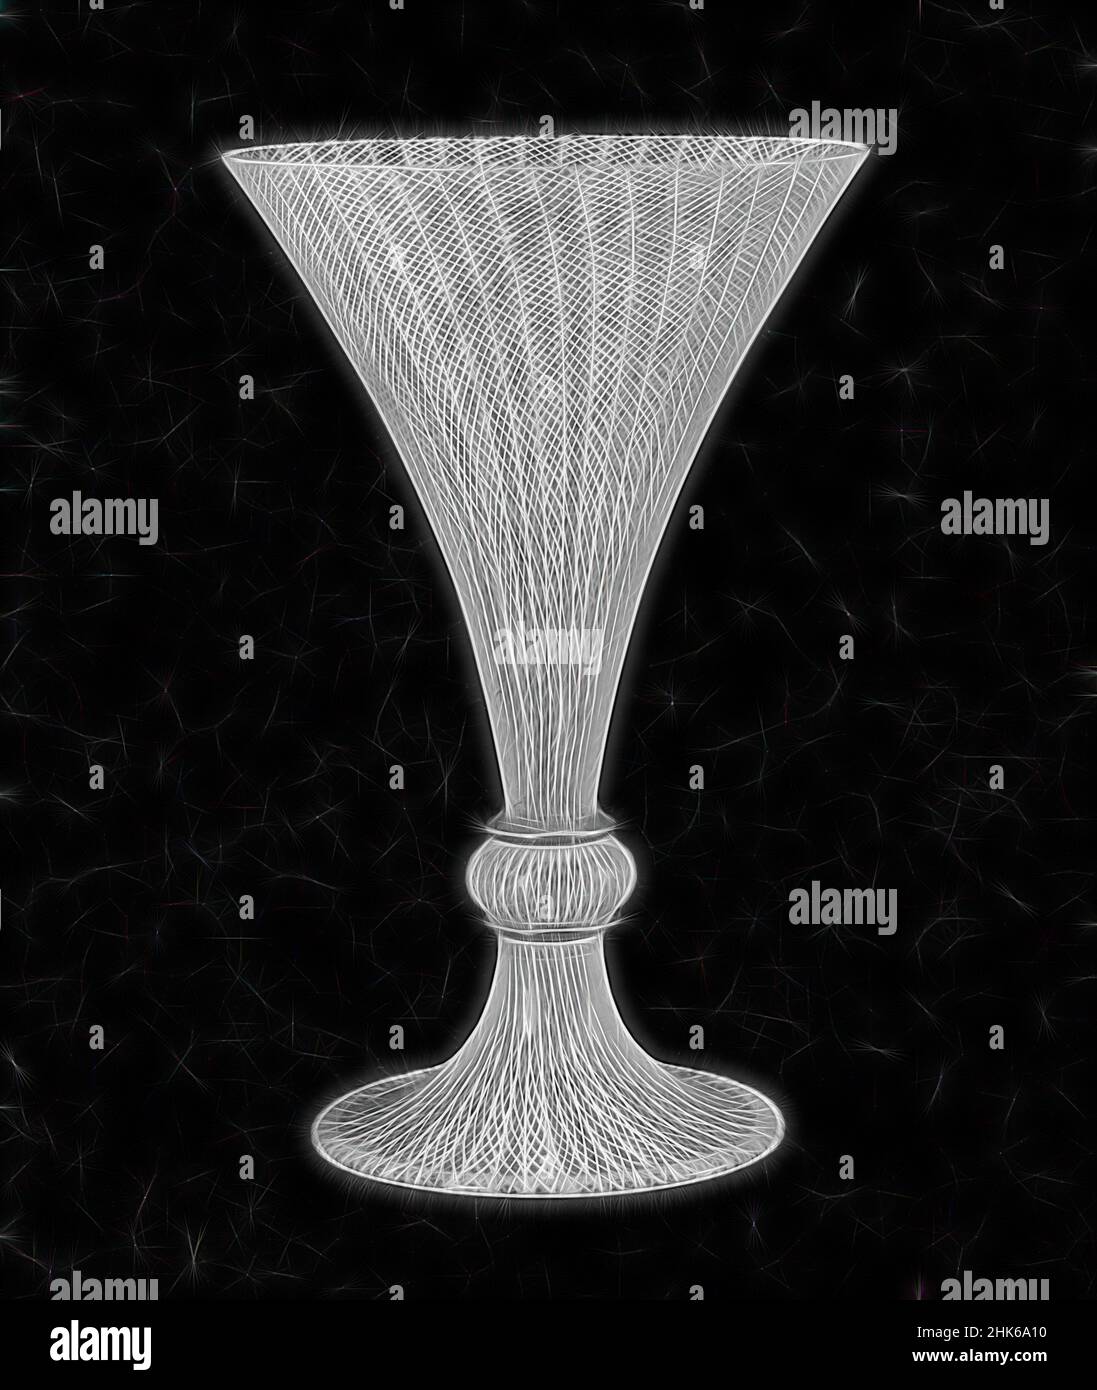 Inspired by Goblet, Venetian, 697–1797, c.1550–1600, Glass, Made in Venice, Veneto, Republic of Venice (La Serenissima), Italy, Europe, Glassware, 6 7/8 x 4 3/8 x 4 3/8 in. (17.5 x 11.1 x 11.1 cm, Reimagined by Artotop. Classic art reinvented with a modern twist. Design of warm cheerful glowing of brightness and light ray radiance. Photography inspired by surrealism and futurism, embracing dynamic energy of modern technology, movement, speed and revolutionize culture Stock Photo